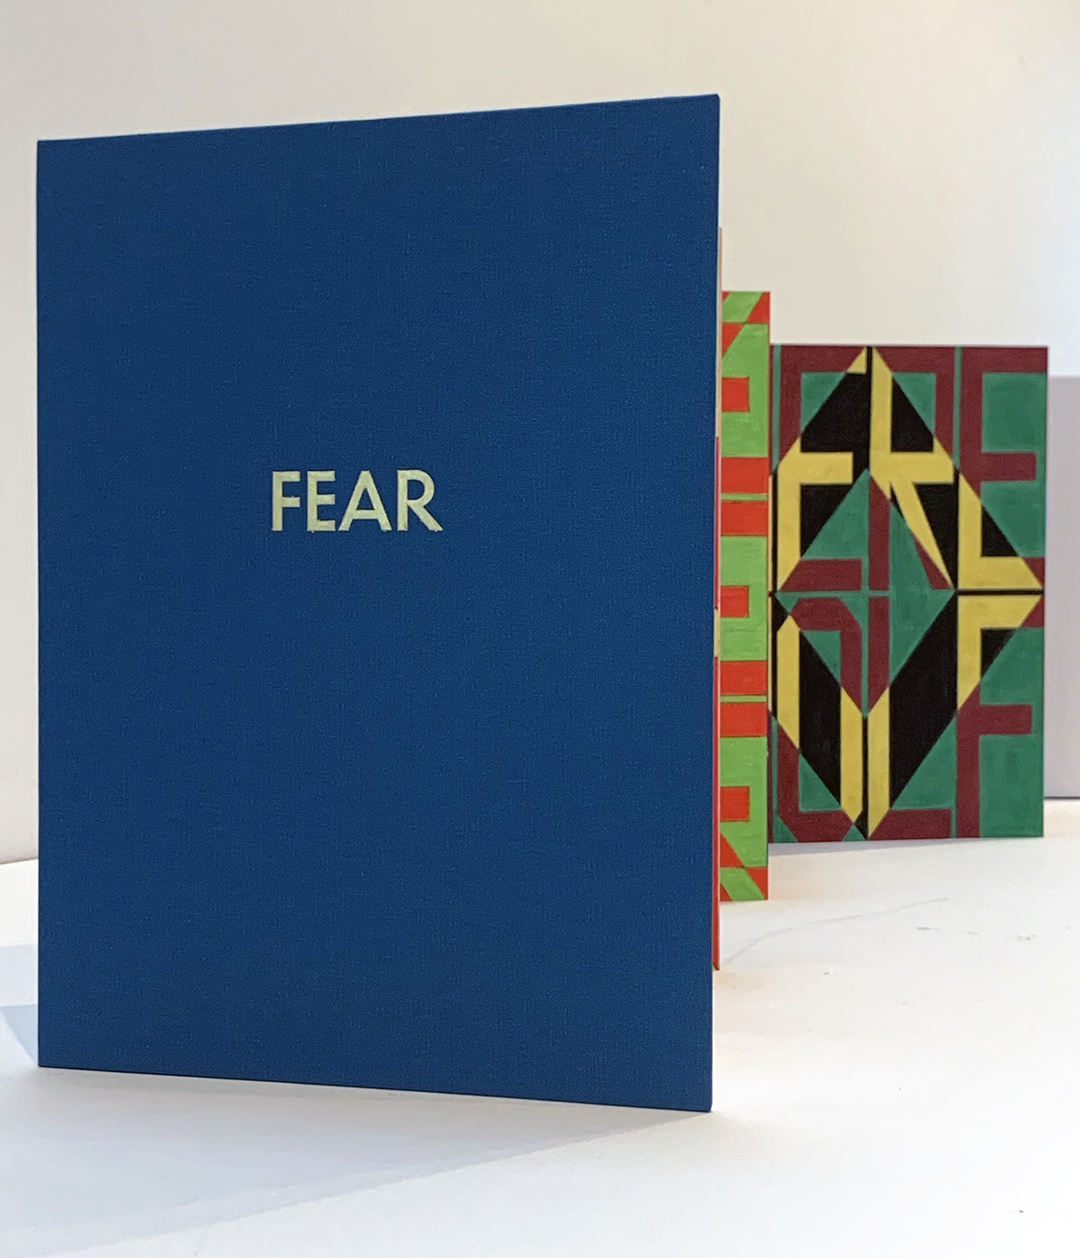 Accordion folded book showing gold stamped cover FEAR